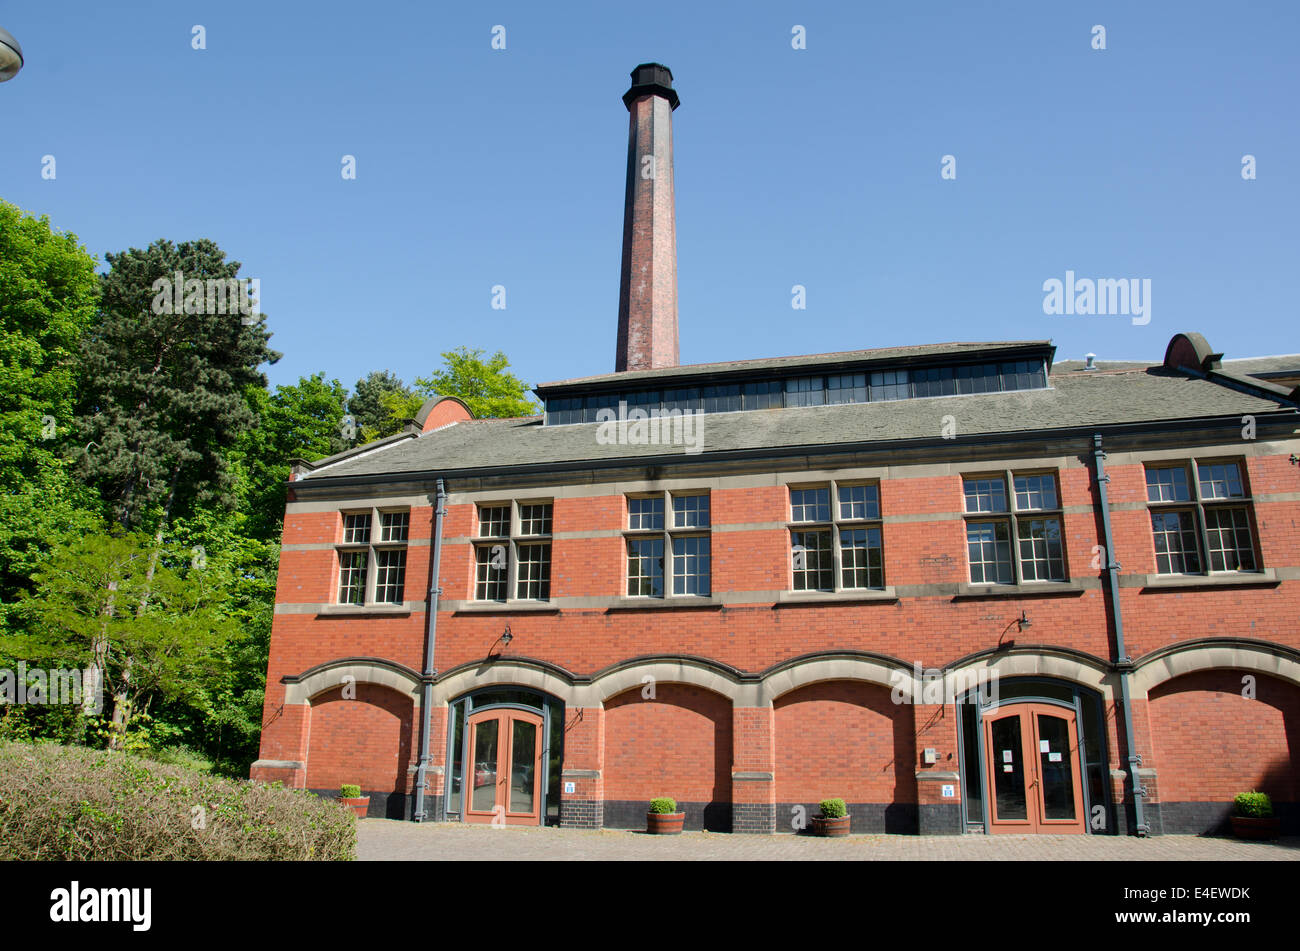 Boughton Pumping Station, an Edwardian building built by the Nottingham Water Company between 1905 and 1907 Stock Photo